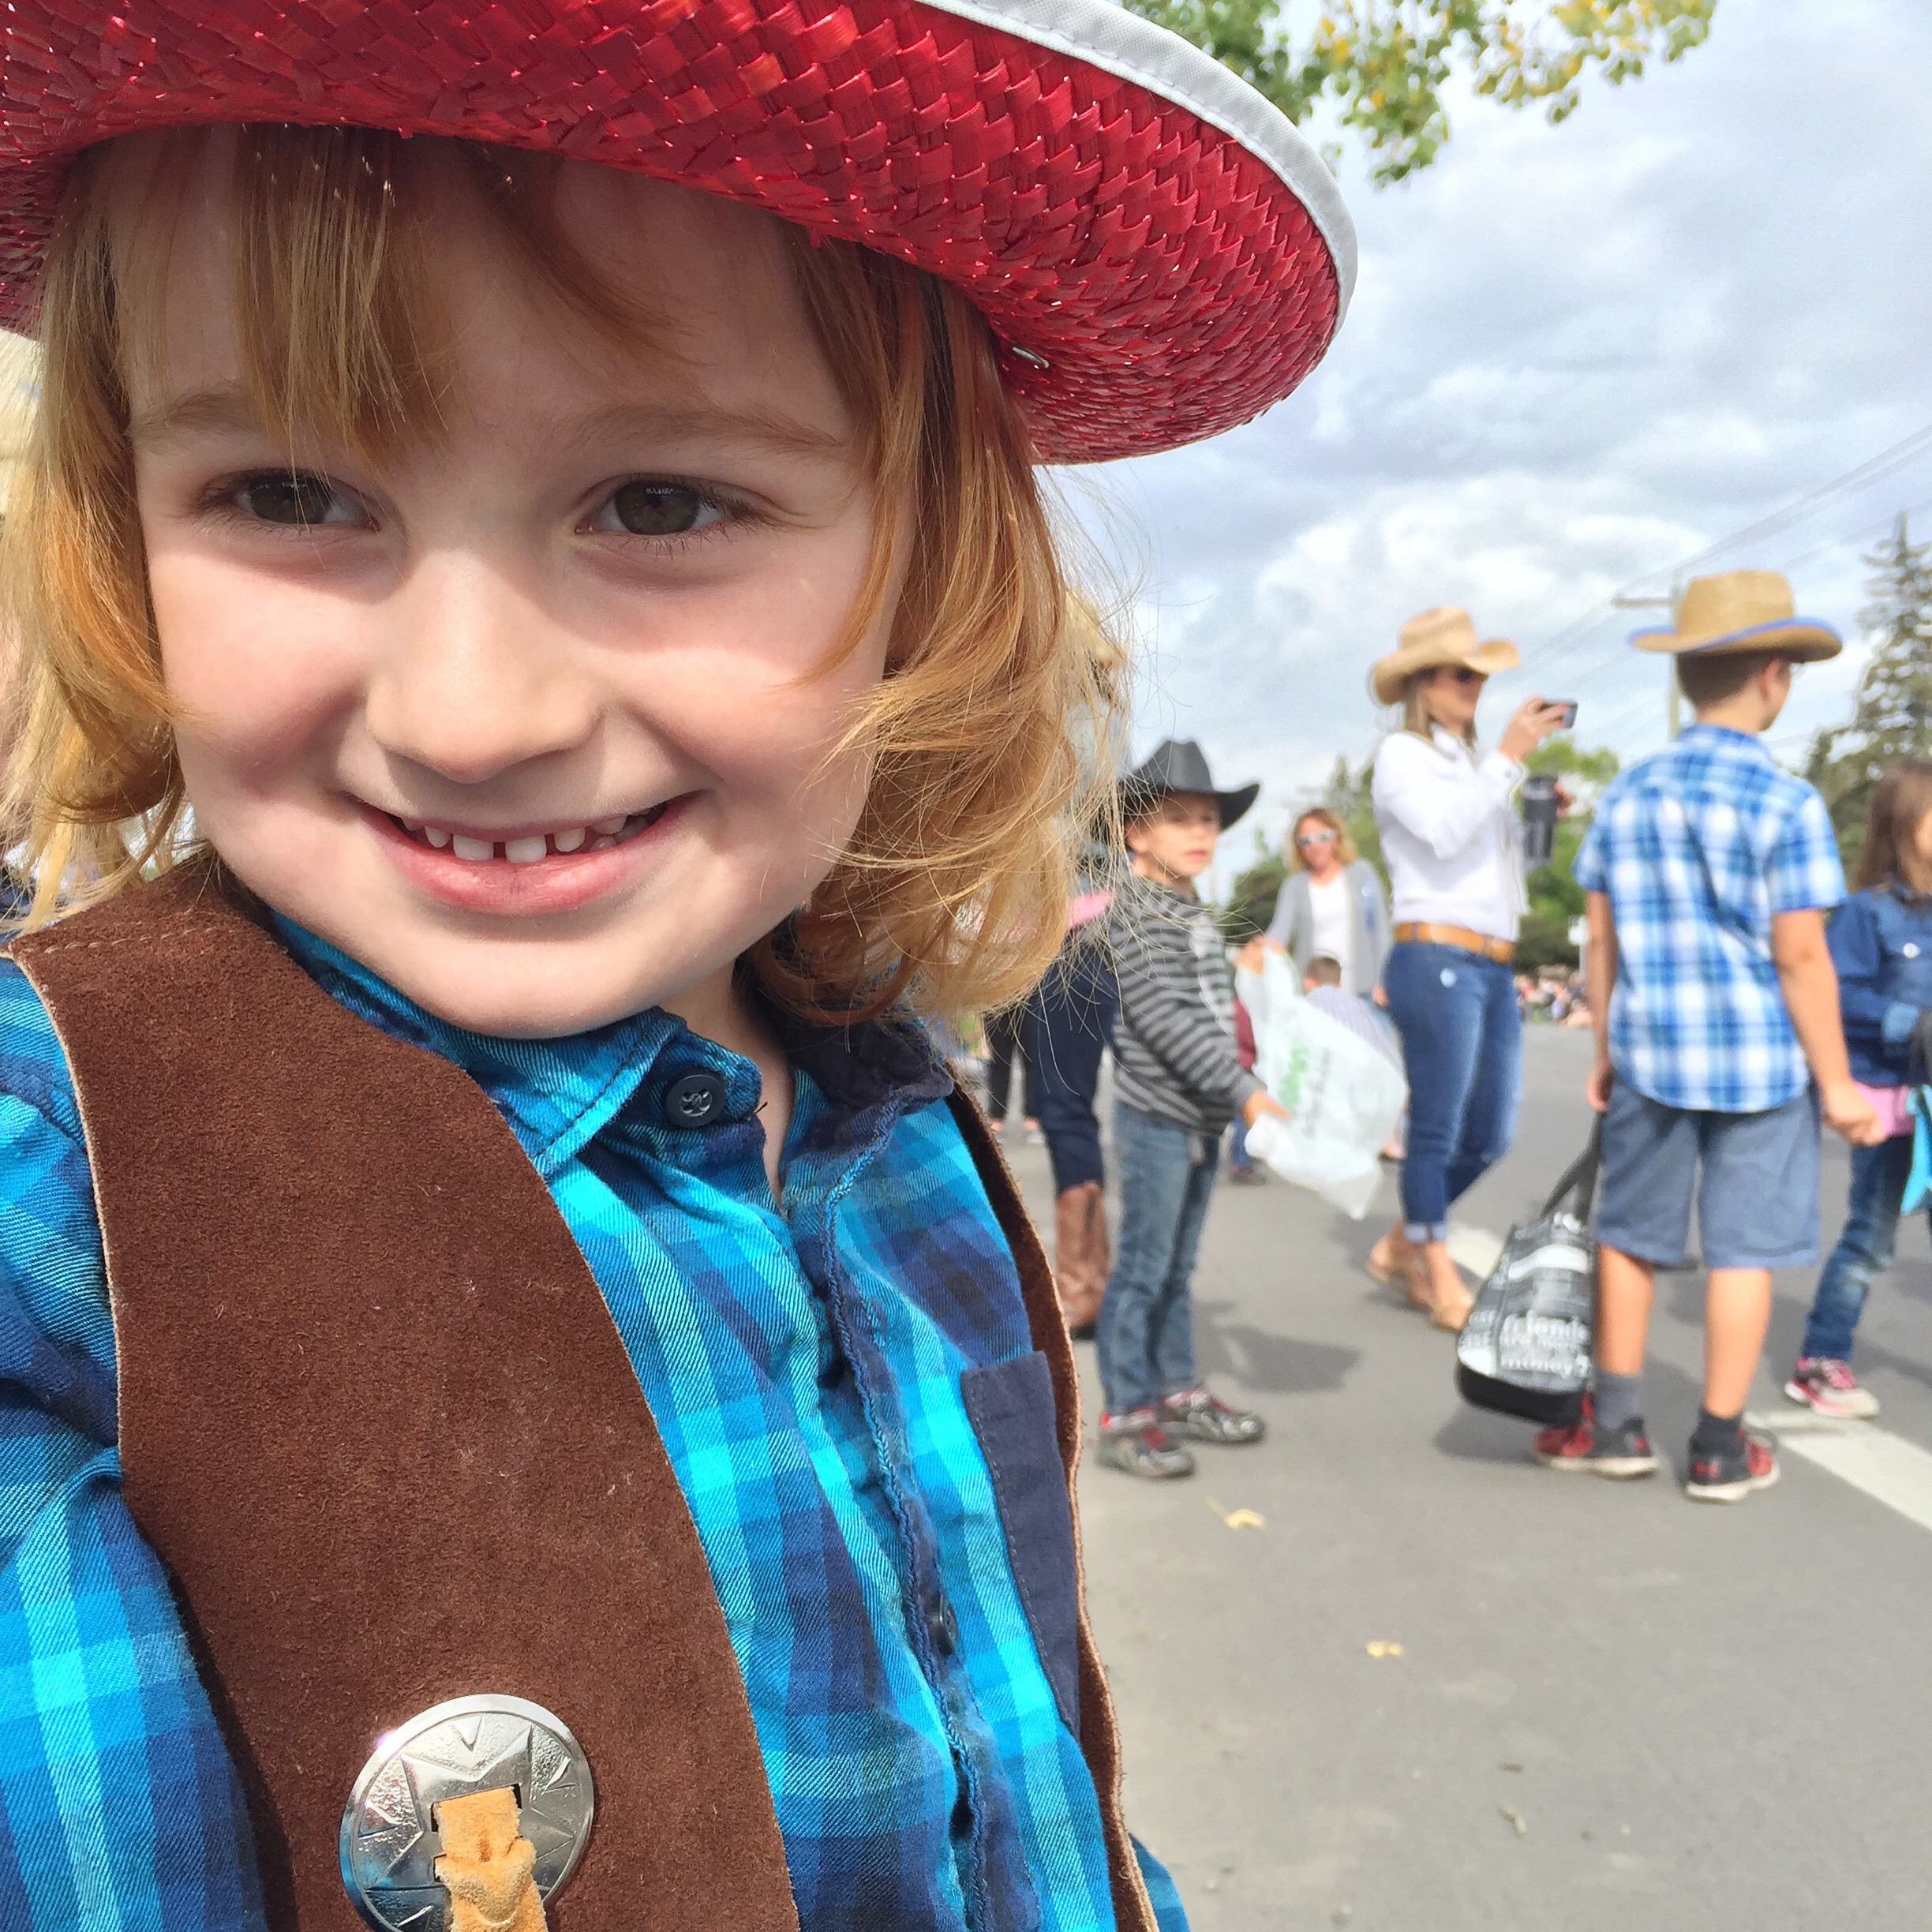 Cowboy Up! {Calgary Stampede Style} ~ Family Fun at the Calgary Stampede ~ By Bubblegum Sass